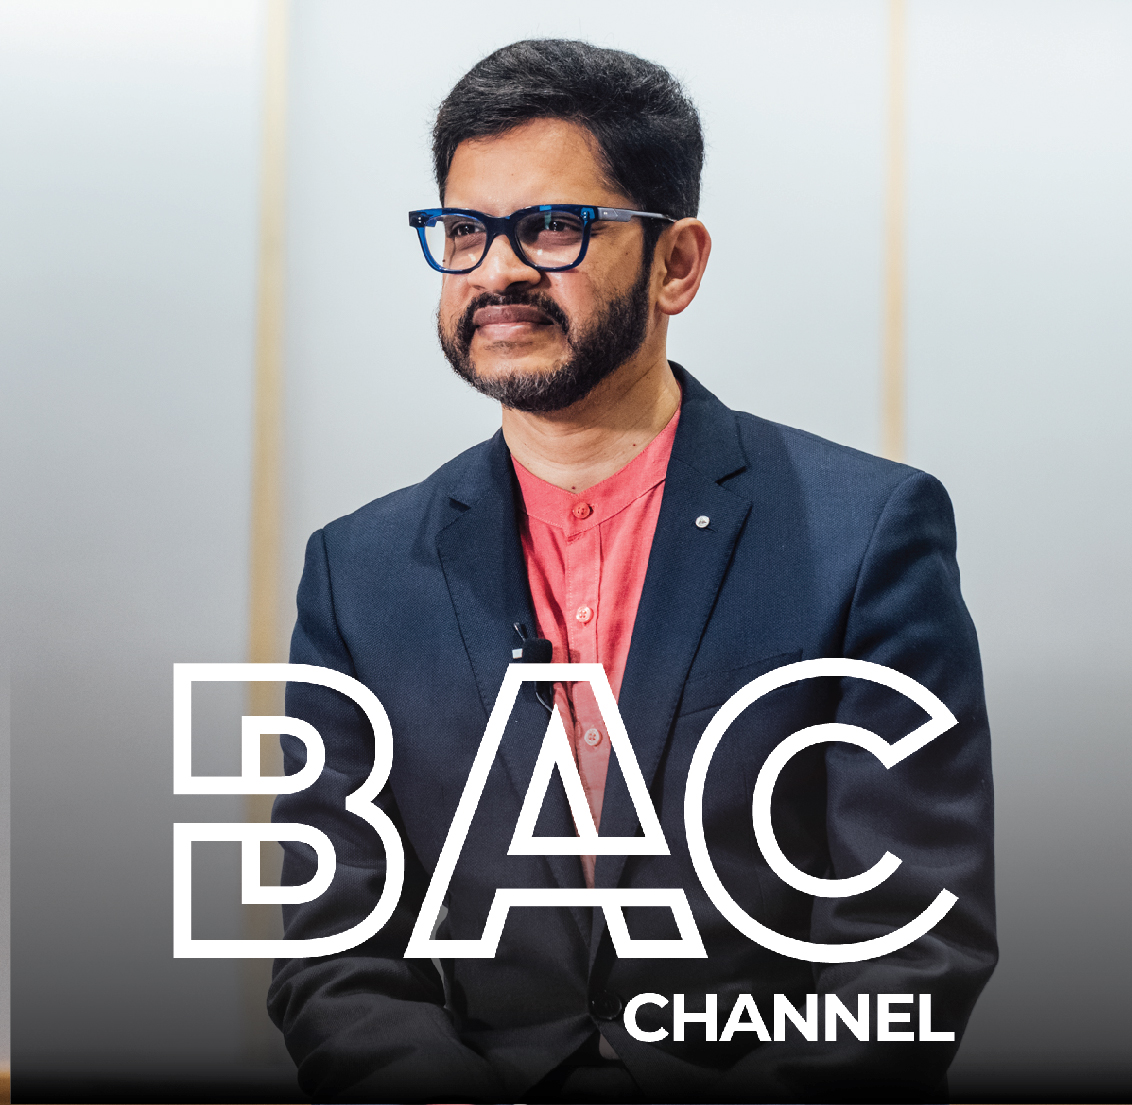 The Boston Architectural College Launches  BAC Channel with Mahesh Daas  Featuring Pritzker Laureate Balkrishna Doshi